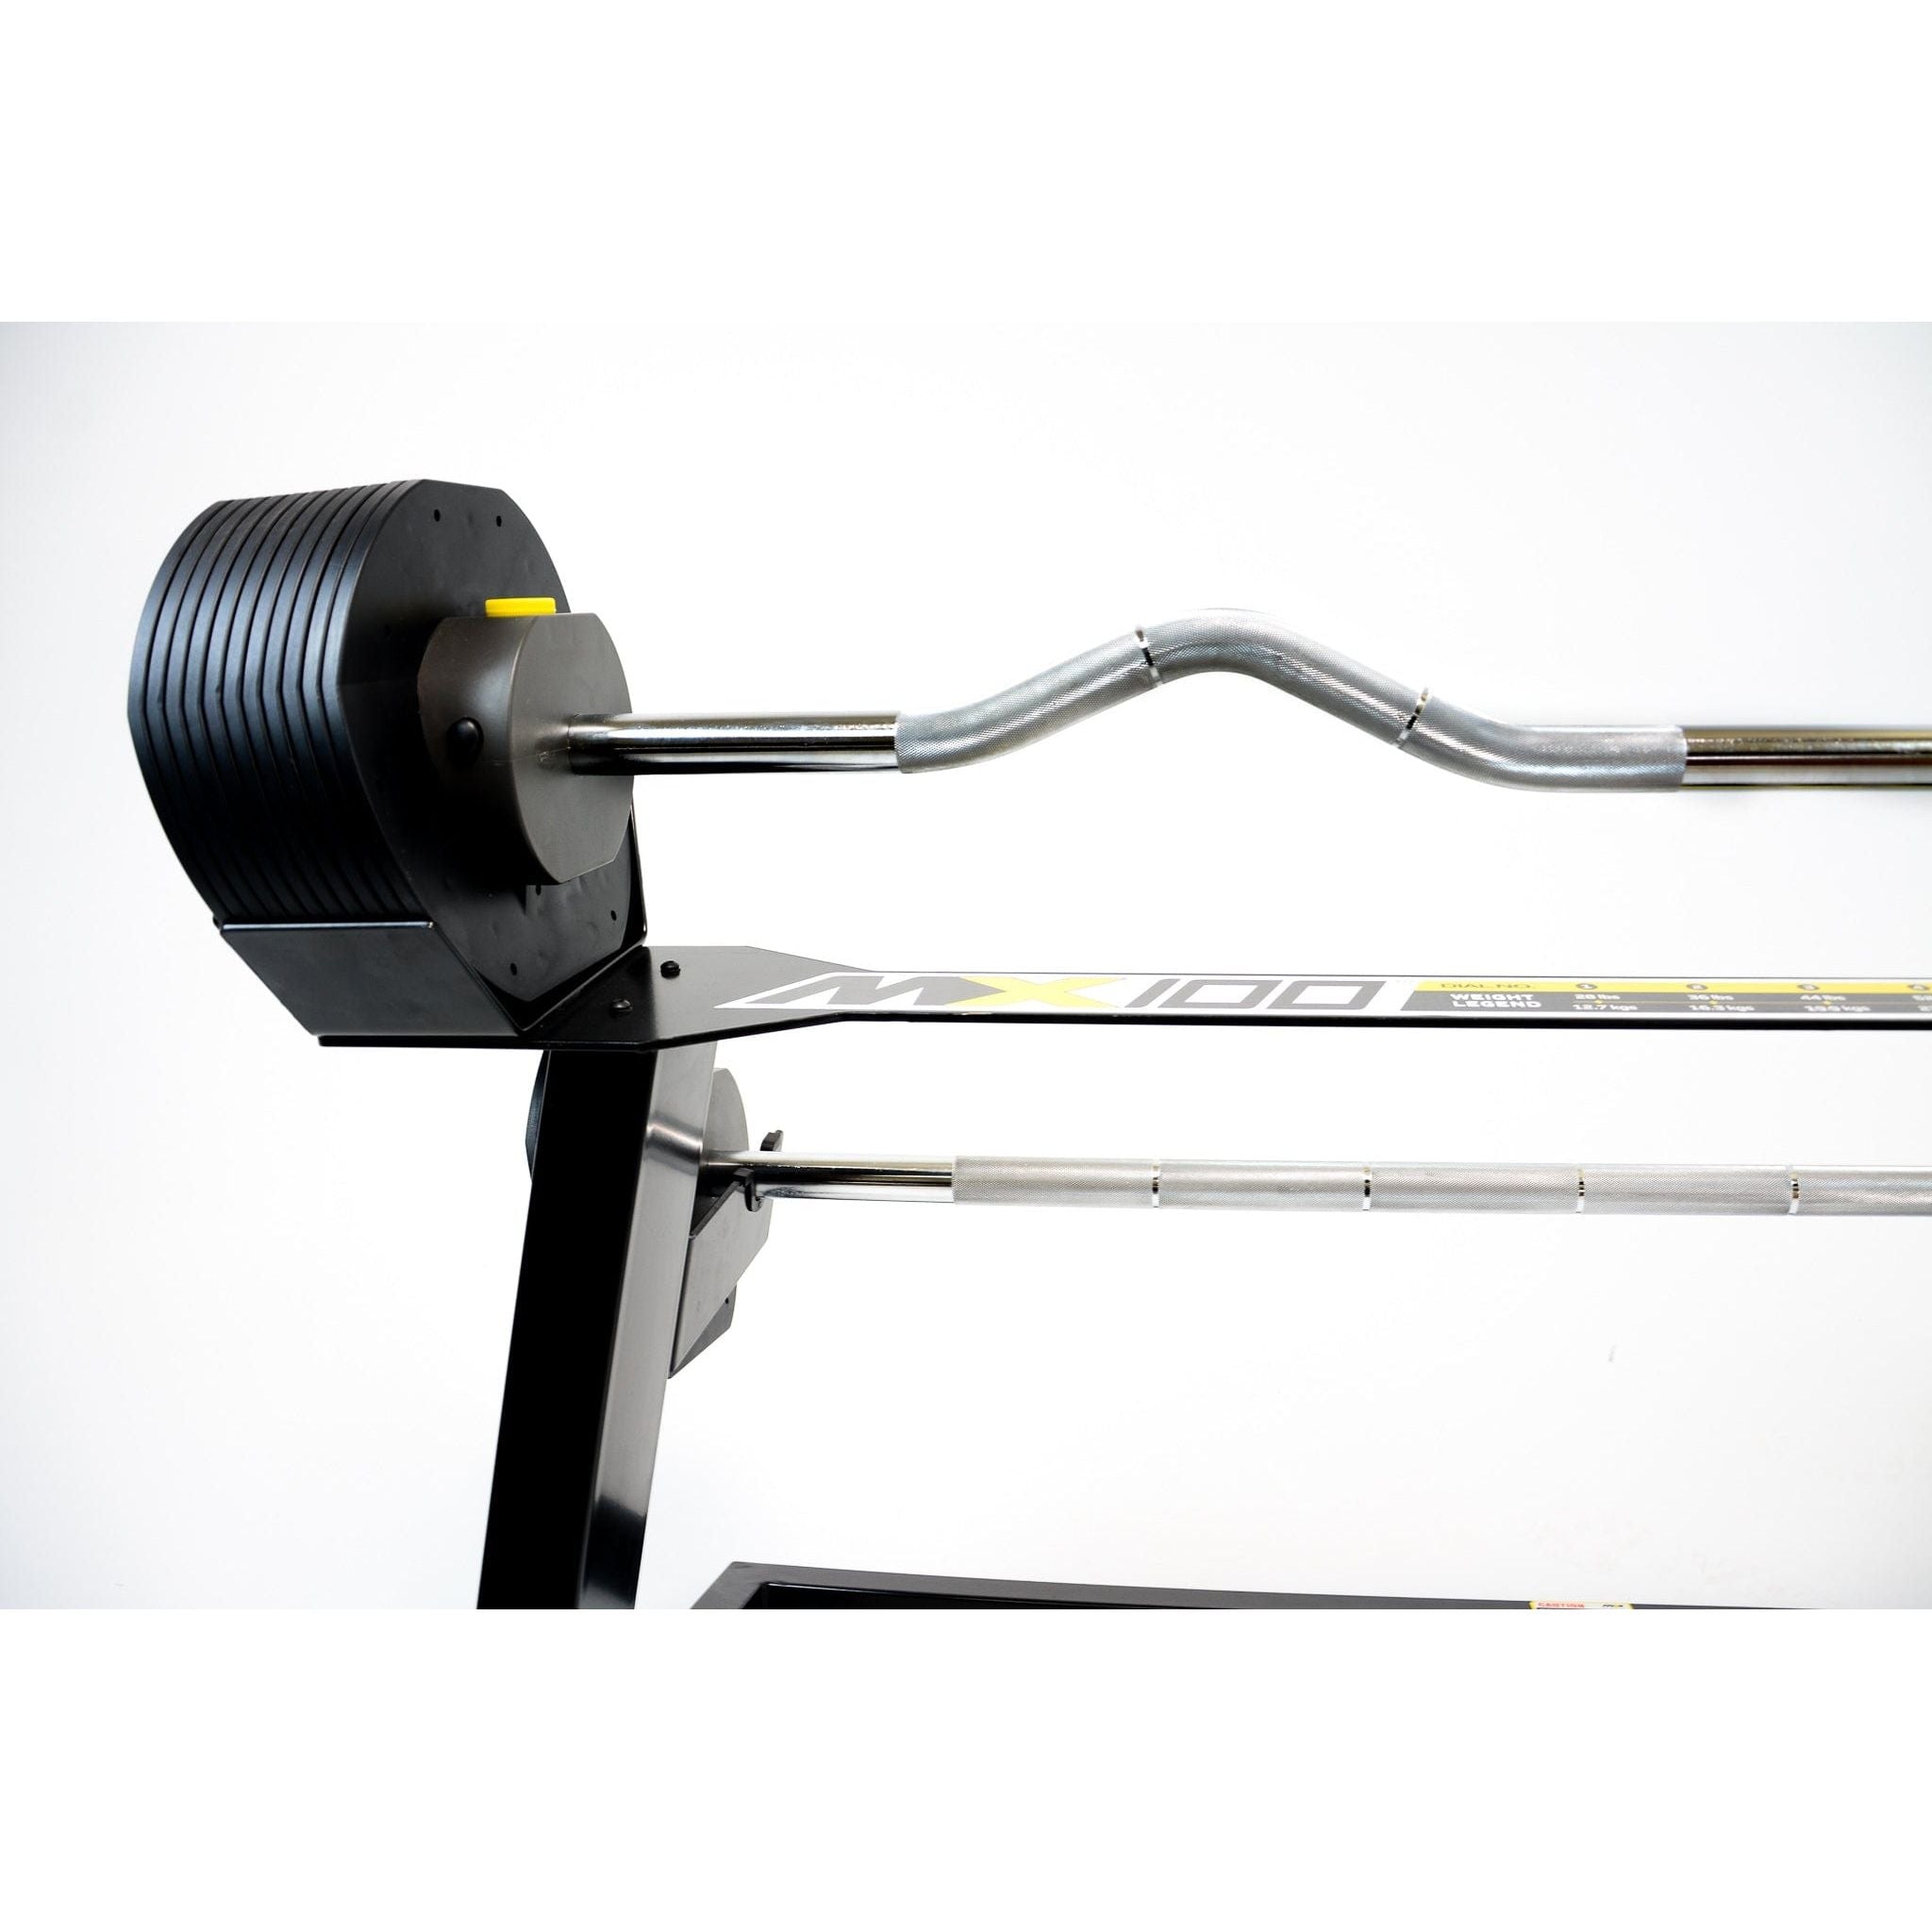 MX100 Rapid Change Adjustable Barbell / Curl Bar System (28 lbs to 100 lbs)